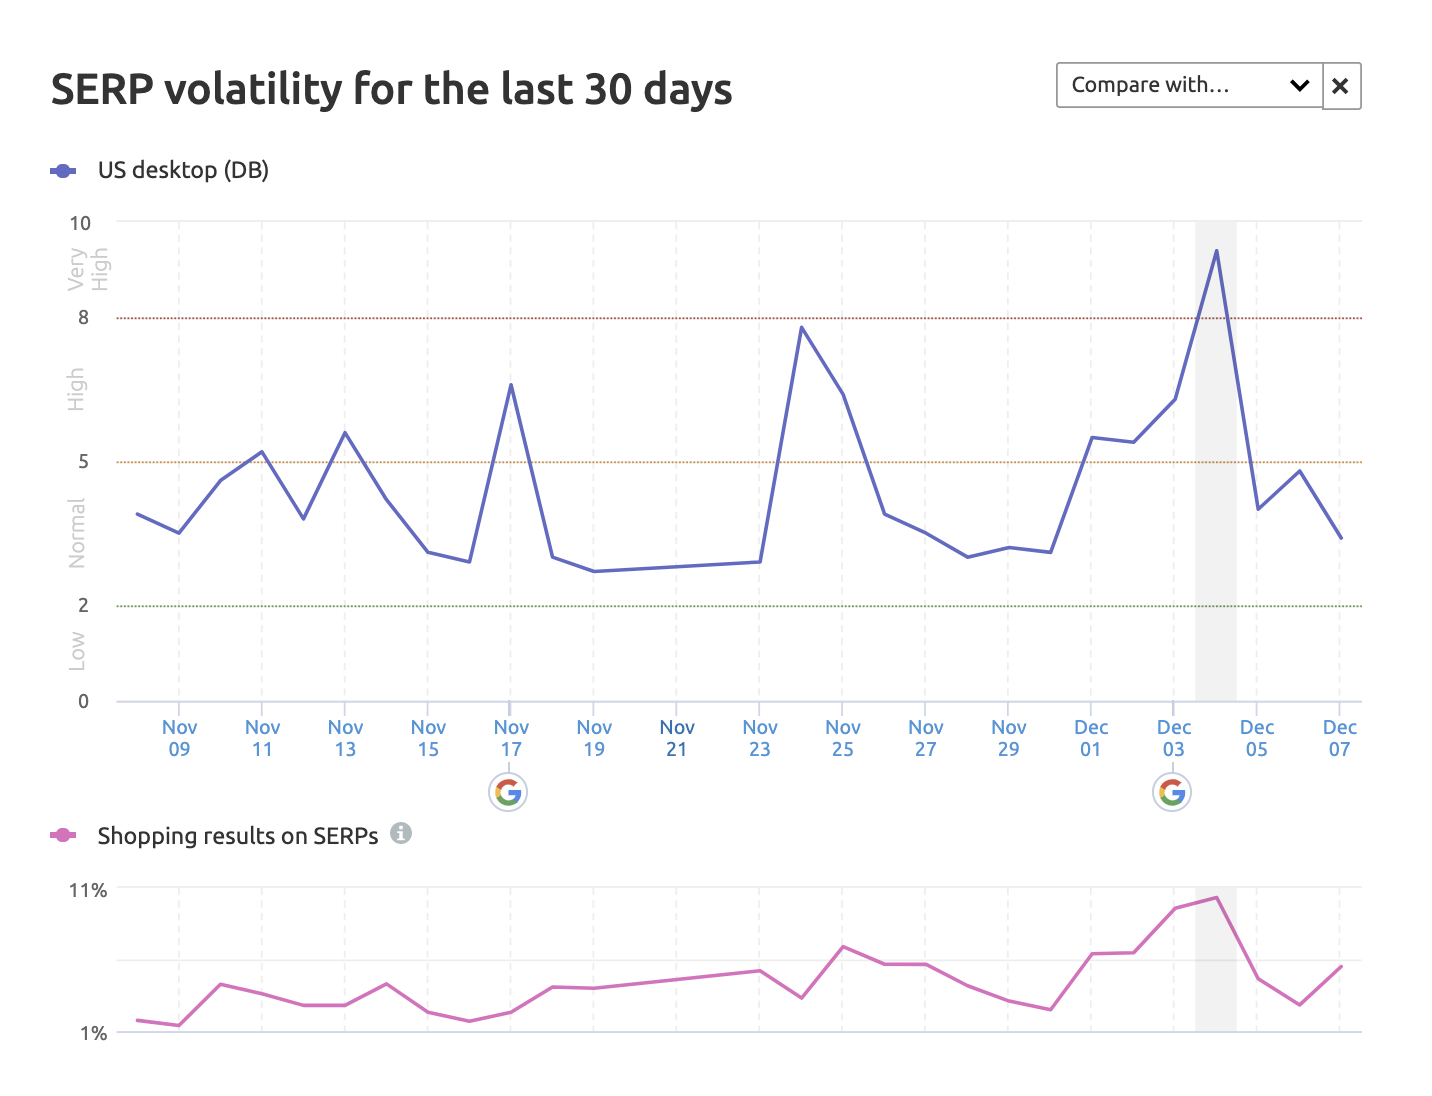 serp volatility of desktop and shopping for the last 30 days before core algoritm update on dec 2020